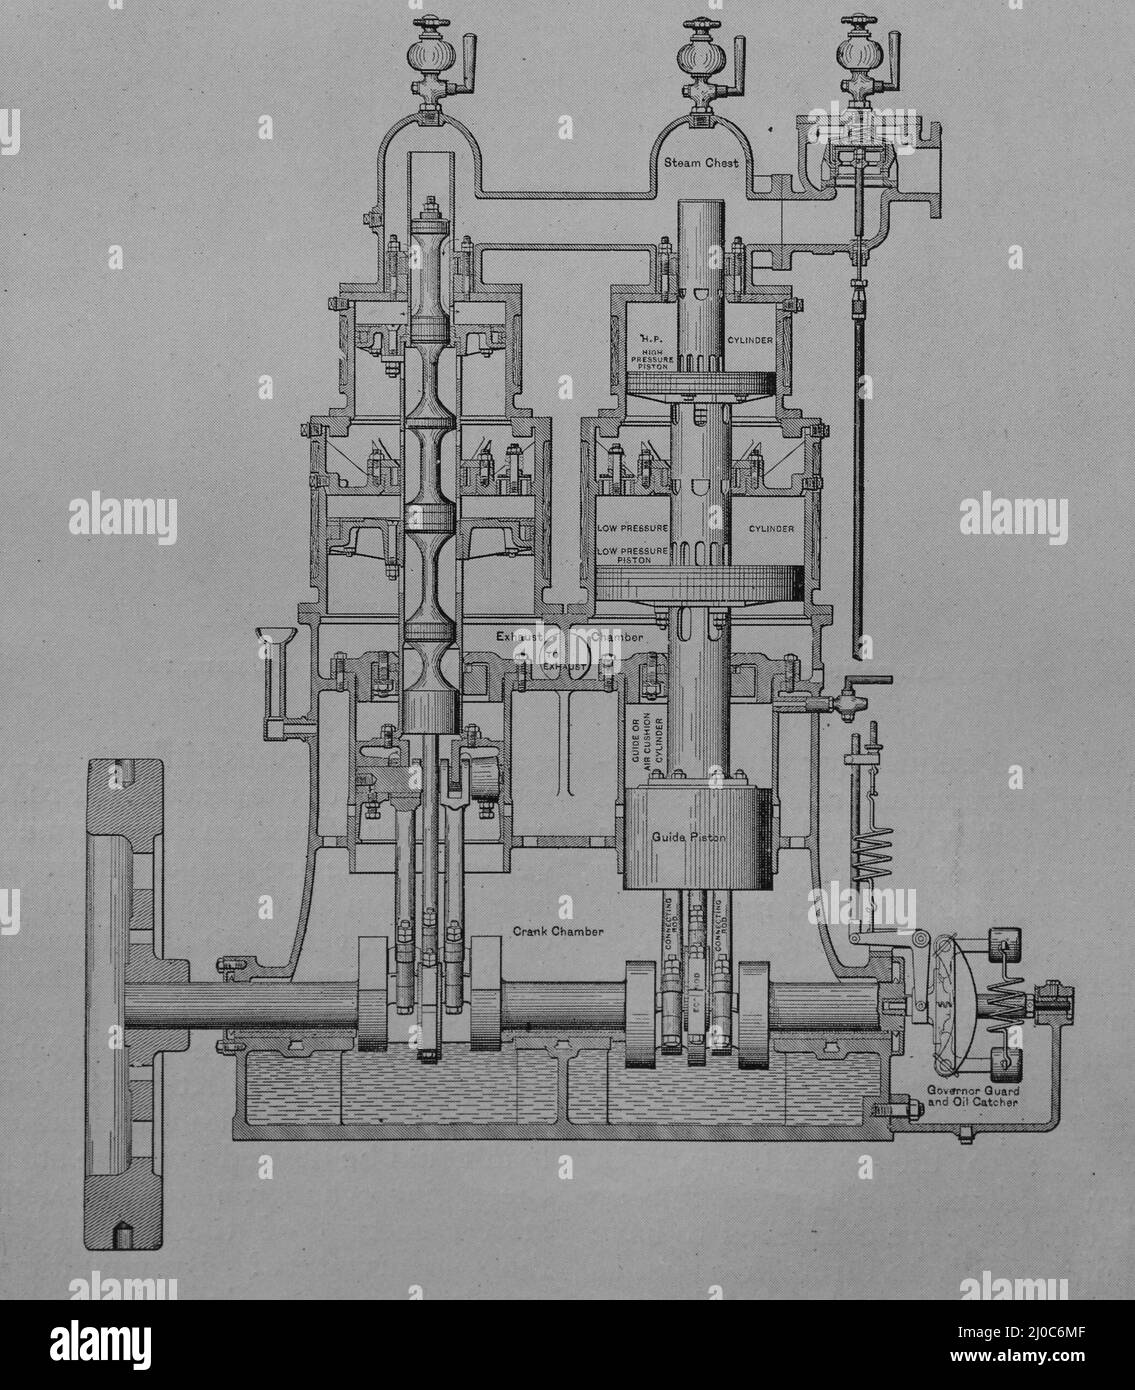 Section of the Willans Central Valve Compound Engine. Black and White Illustration; Stock Photo